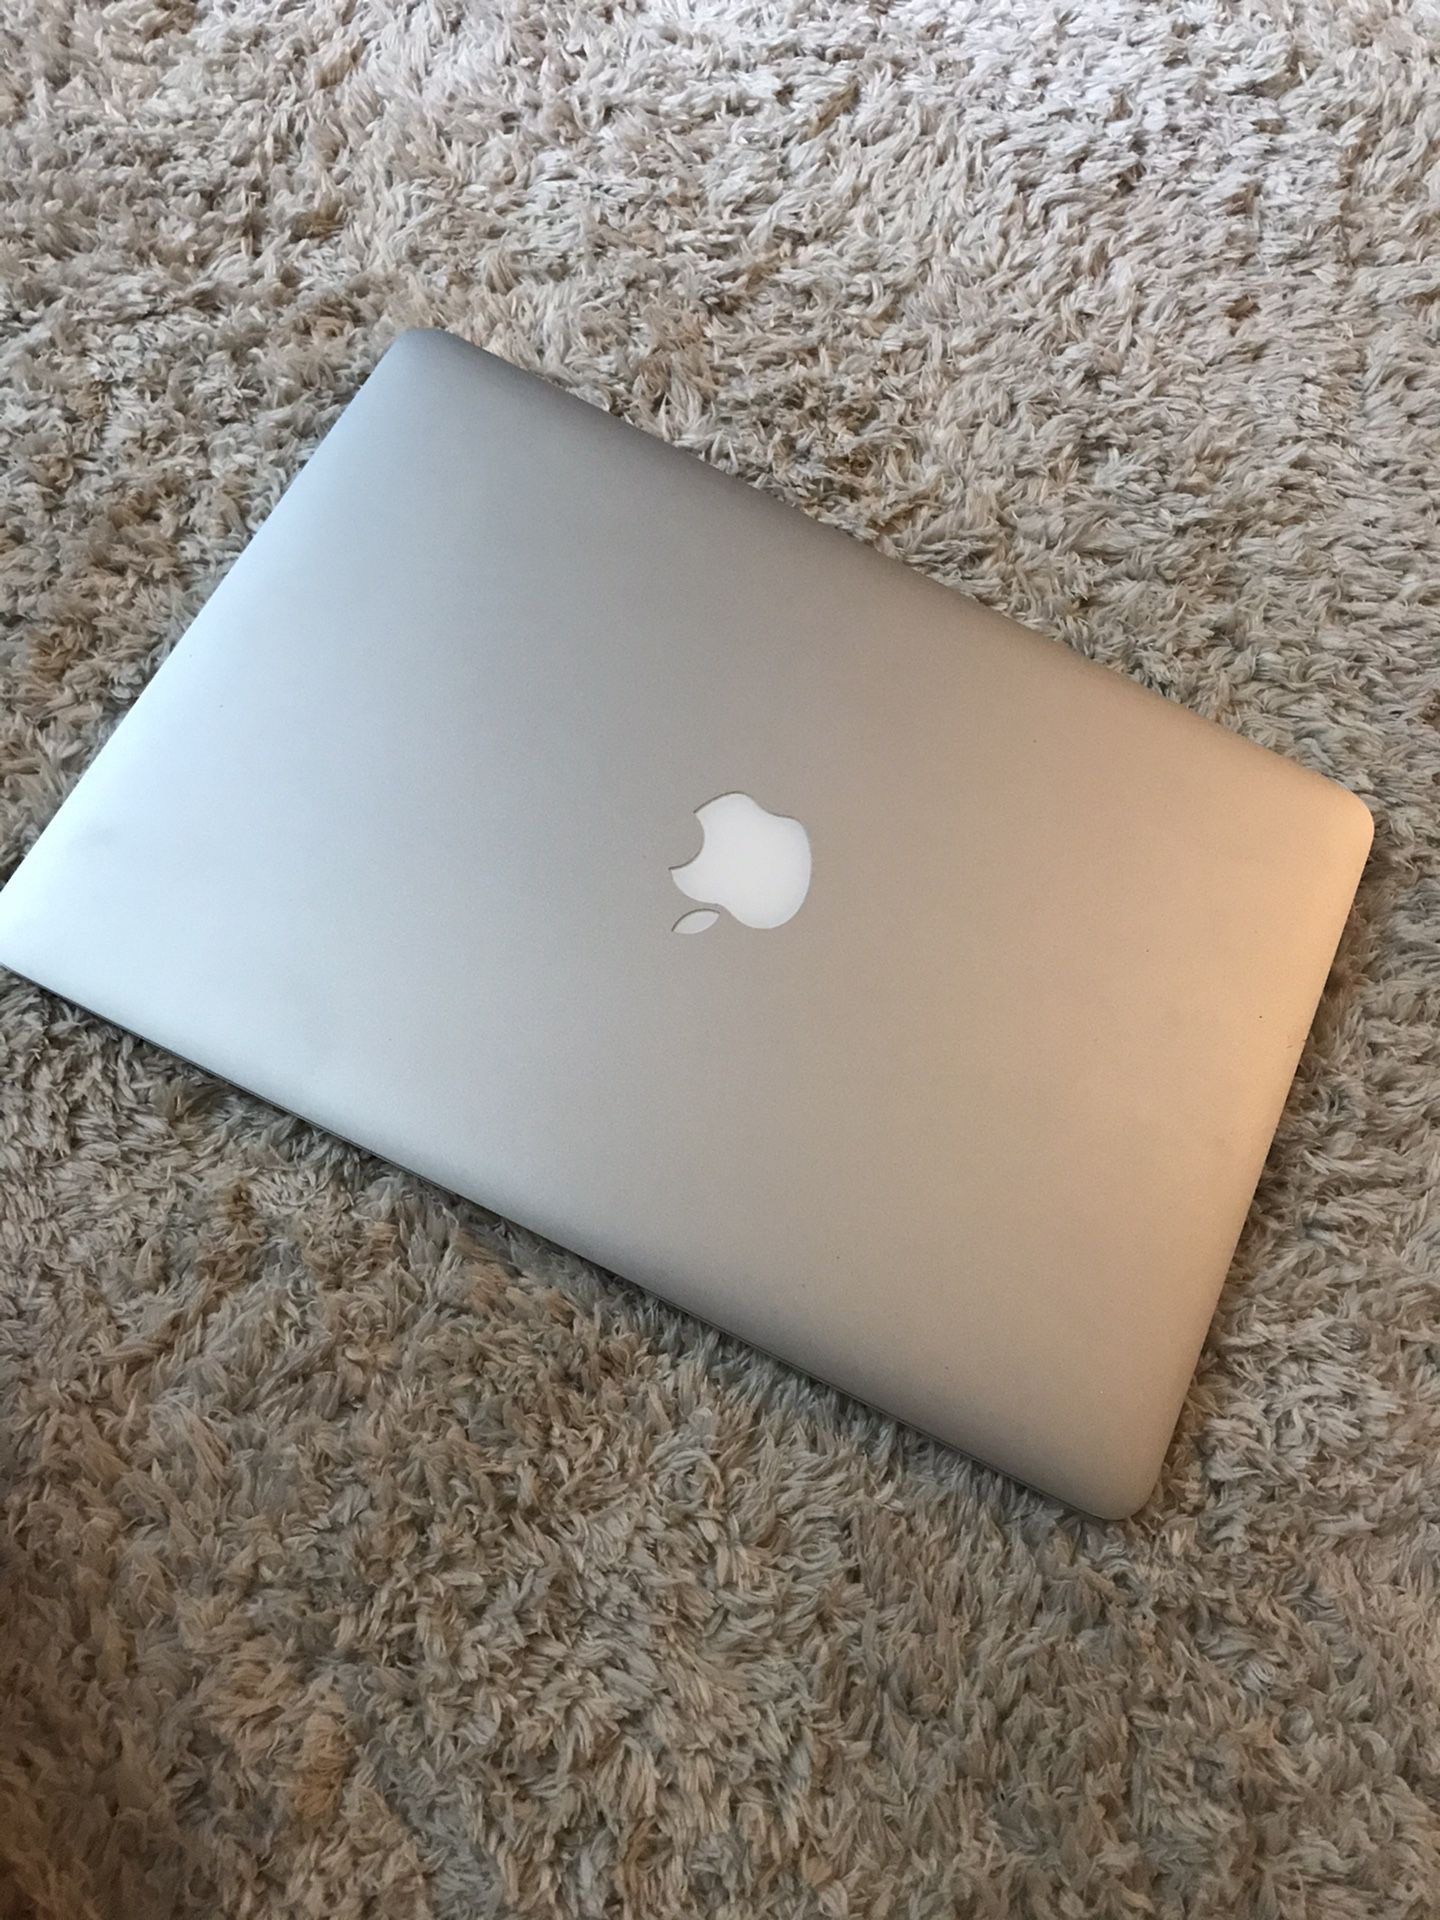 MacBook Air looks like new no scratches